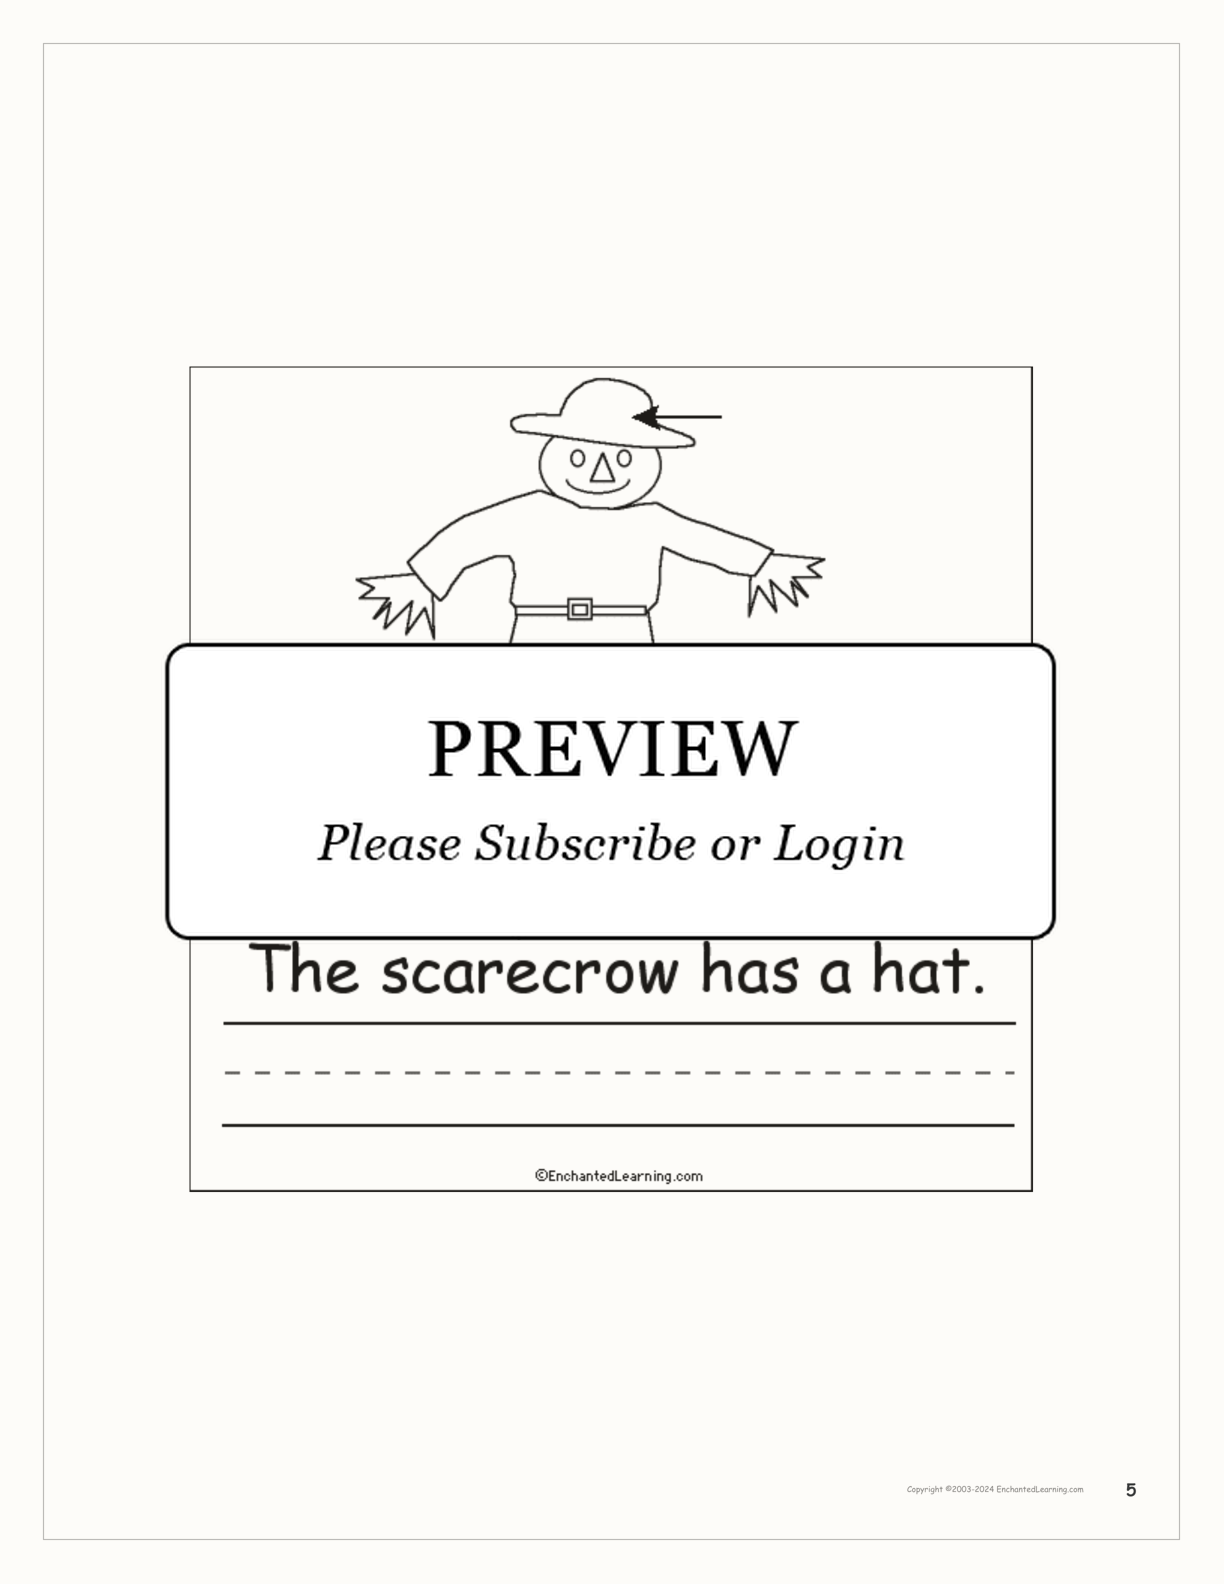 The Scarecrow's Clothes interactive printout page 5